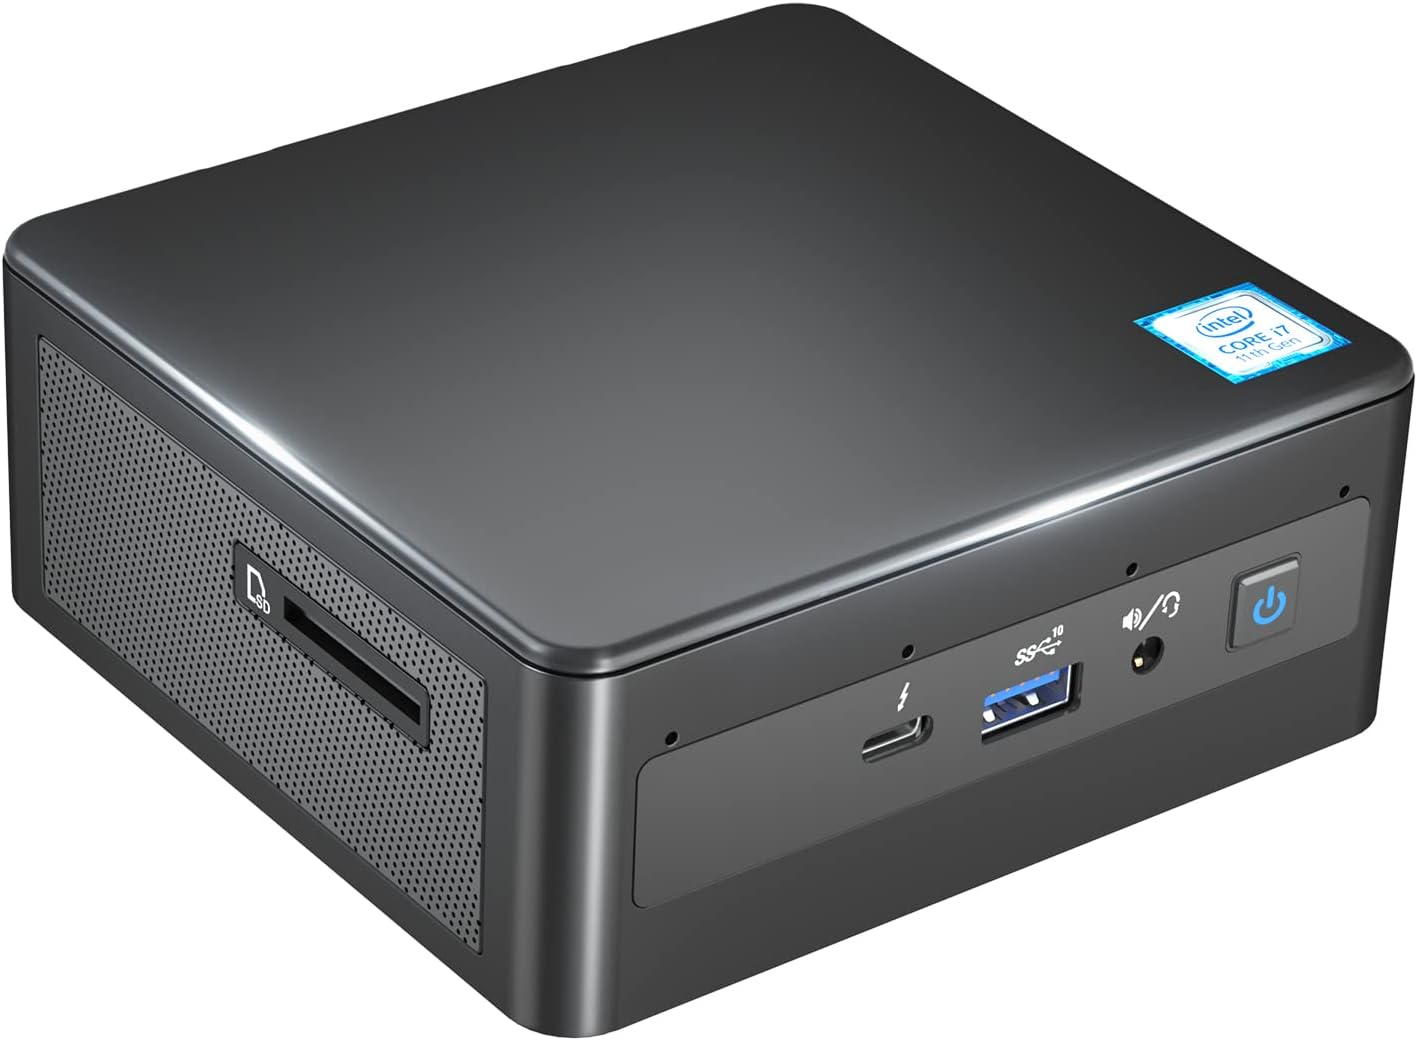 Intel NUC 11 with Core i7-1165G7 Processor(Quad-Core  Up to 4.70 GHz), 4 Intel Nuc 11 16GB DDR4 RAM  512GB SSD - Versatile Nuc 11 i7 with WiFi, Bluetooth, 8K Support - Built-in Windows 10 Pro